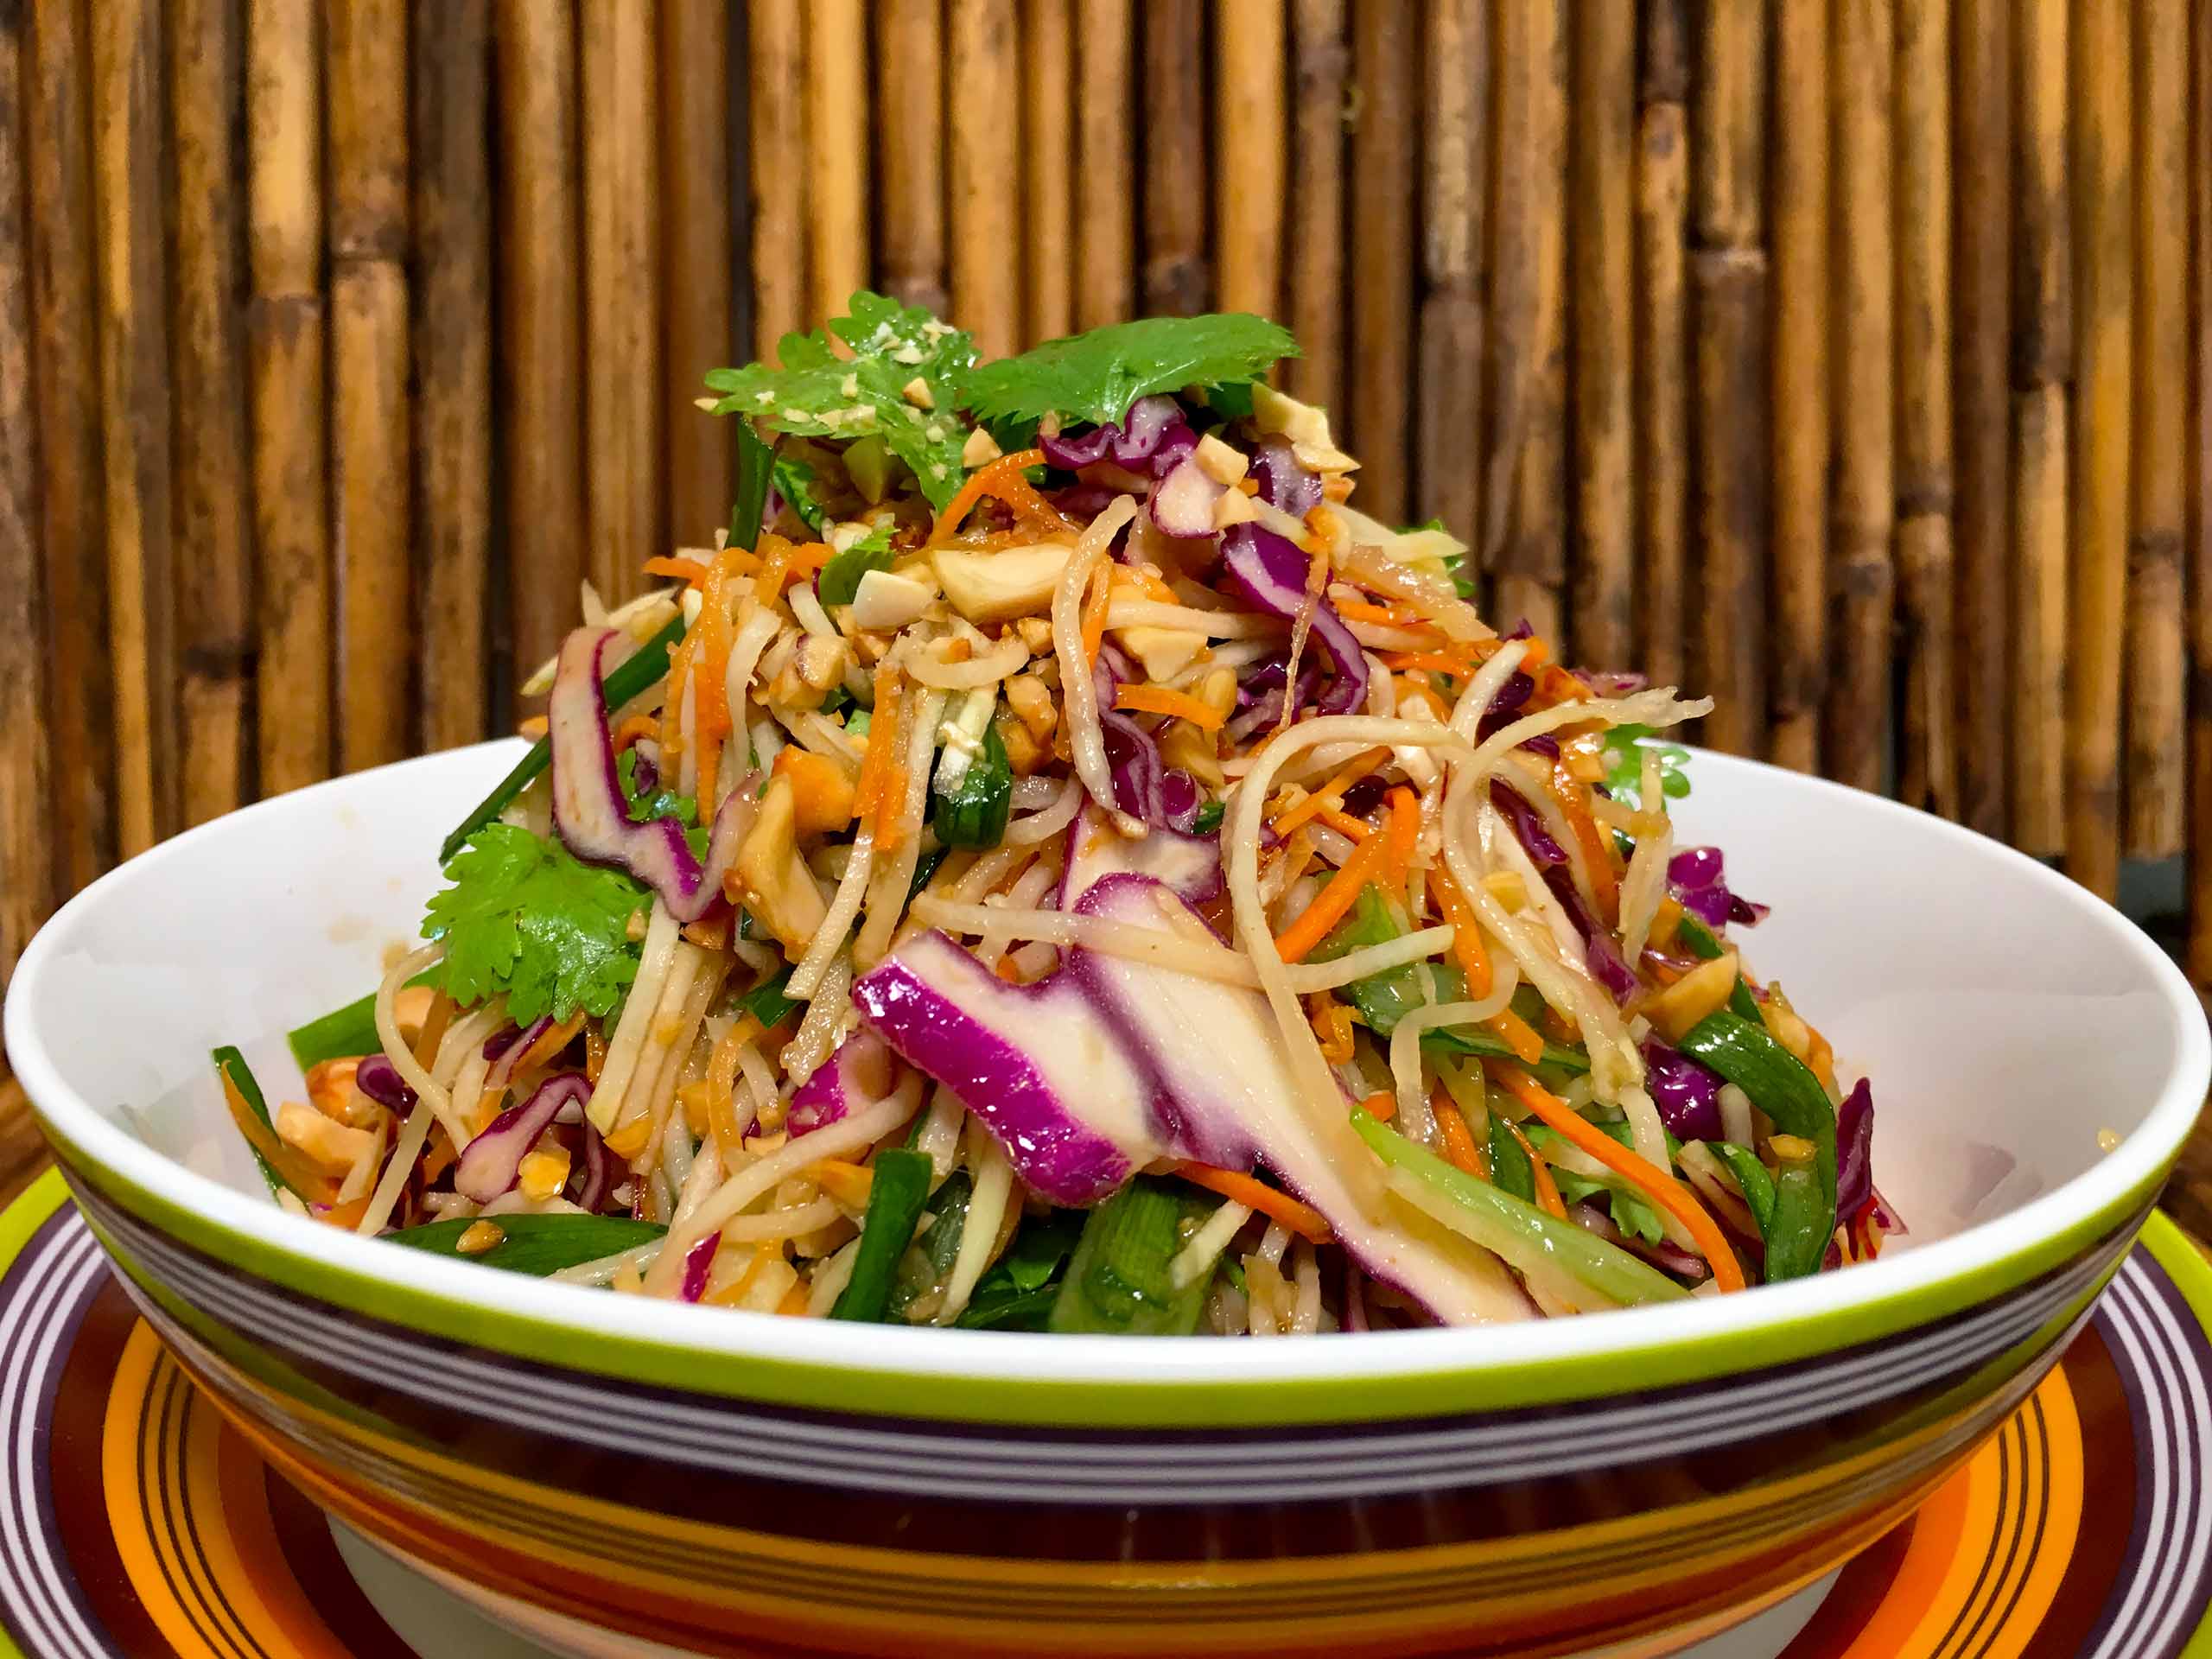 Asian style root salad